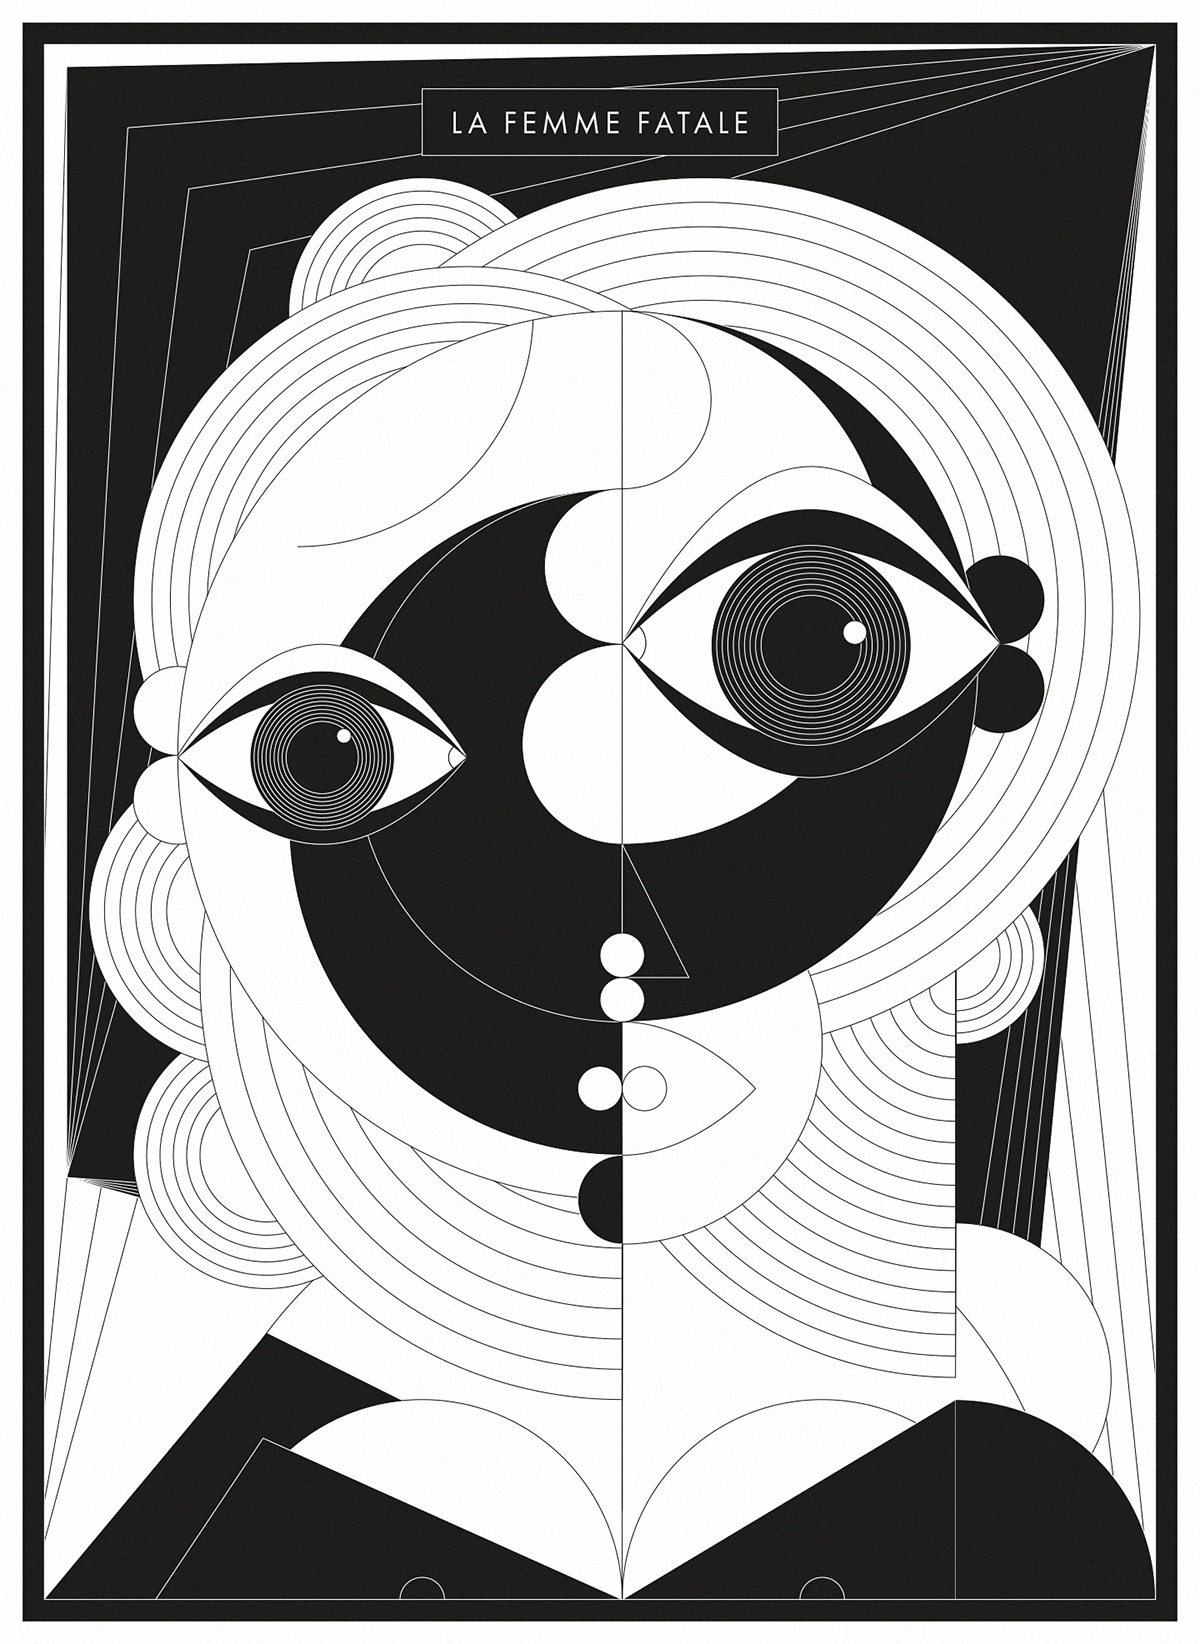 The Iconic Women, a graphical poster series by Sebastian Onufszak